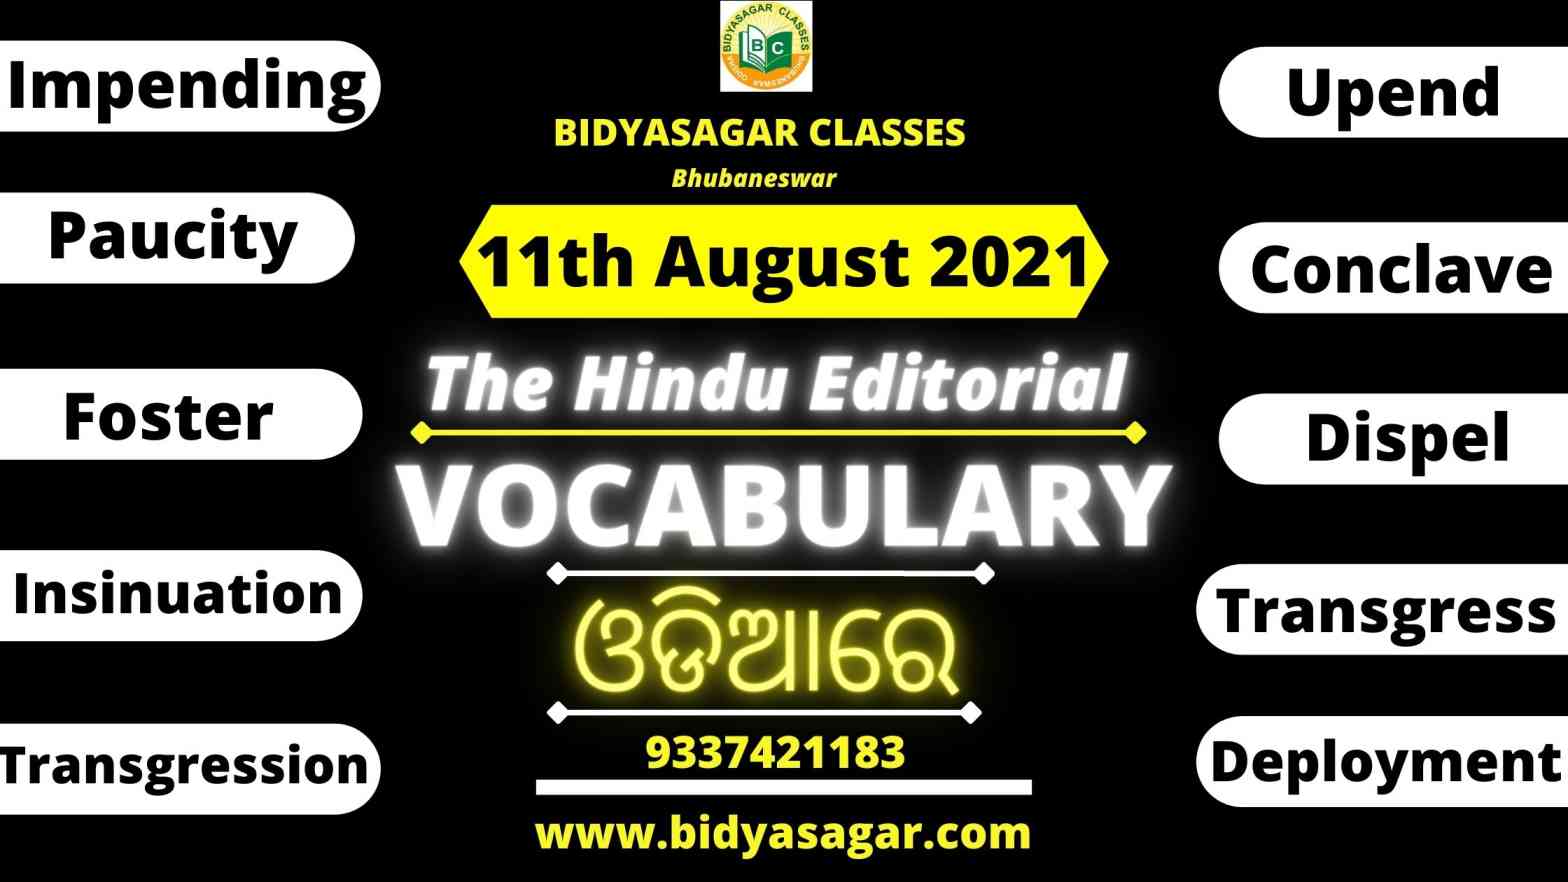 The Hindu Editorial Vocabulary of 11th August 2021